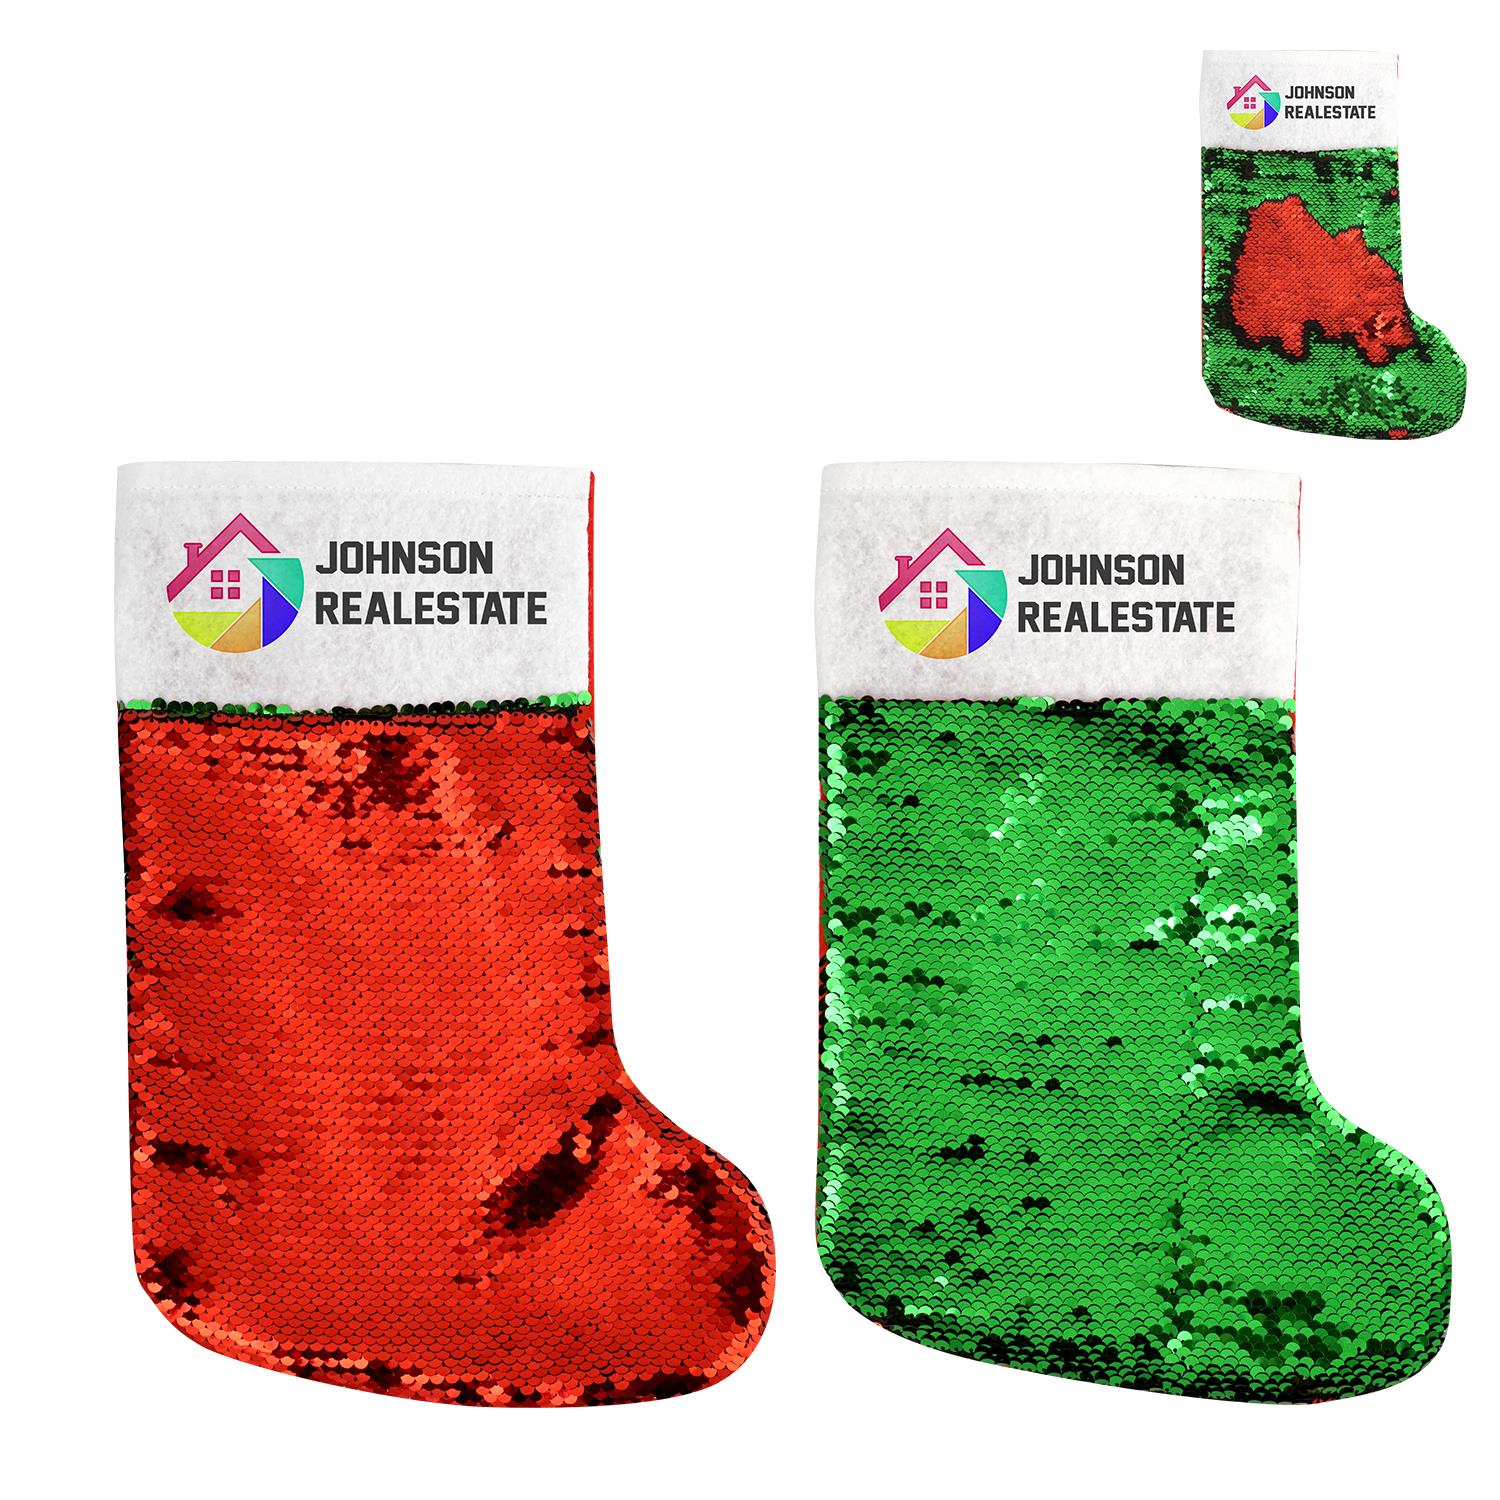 Sequin Holiday Stocking